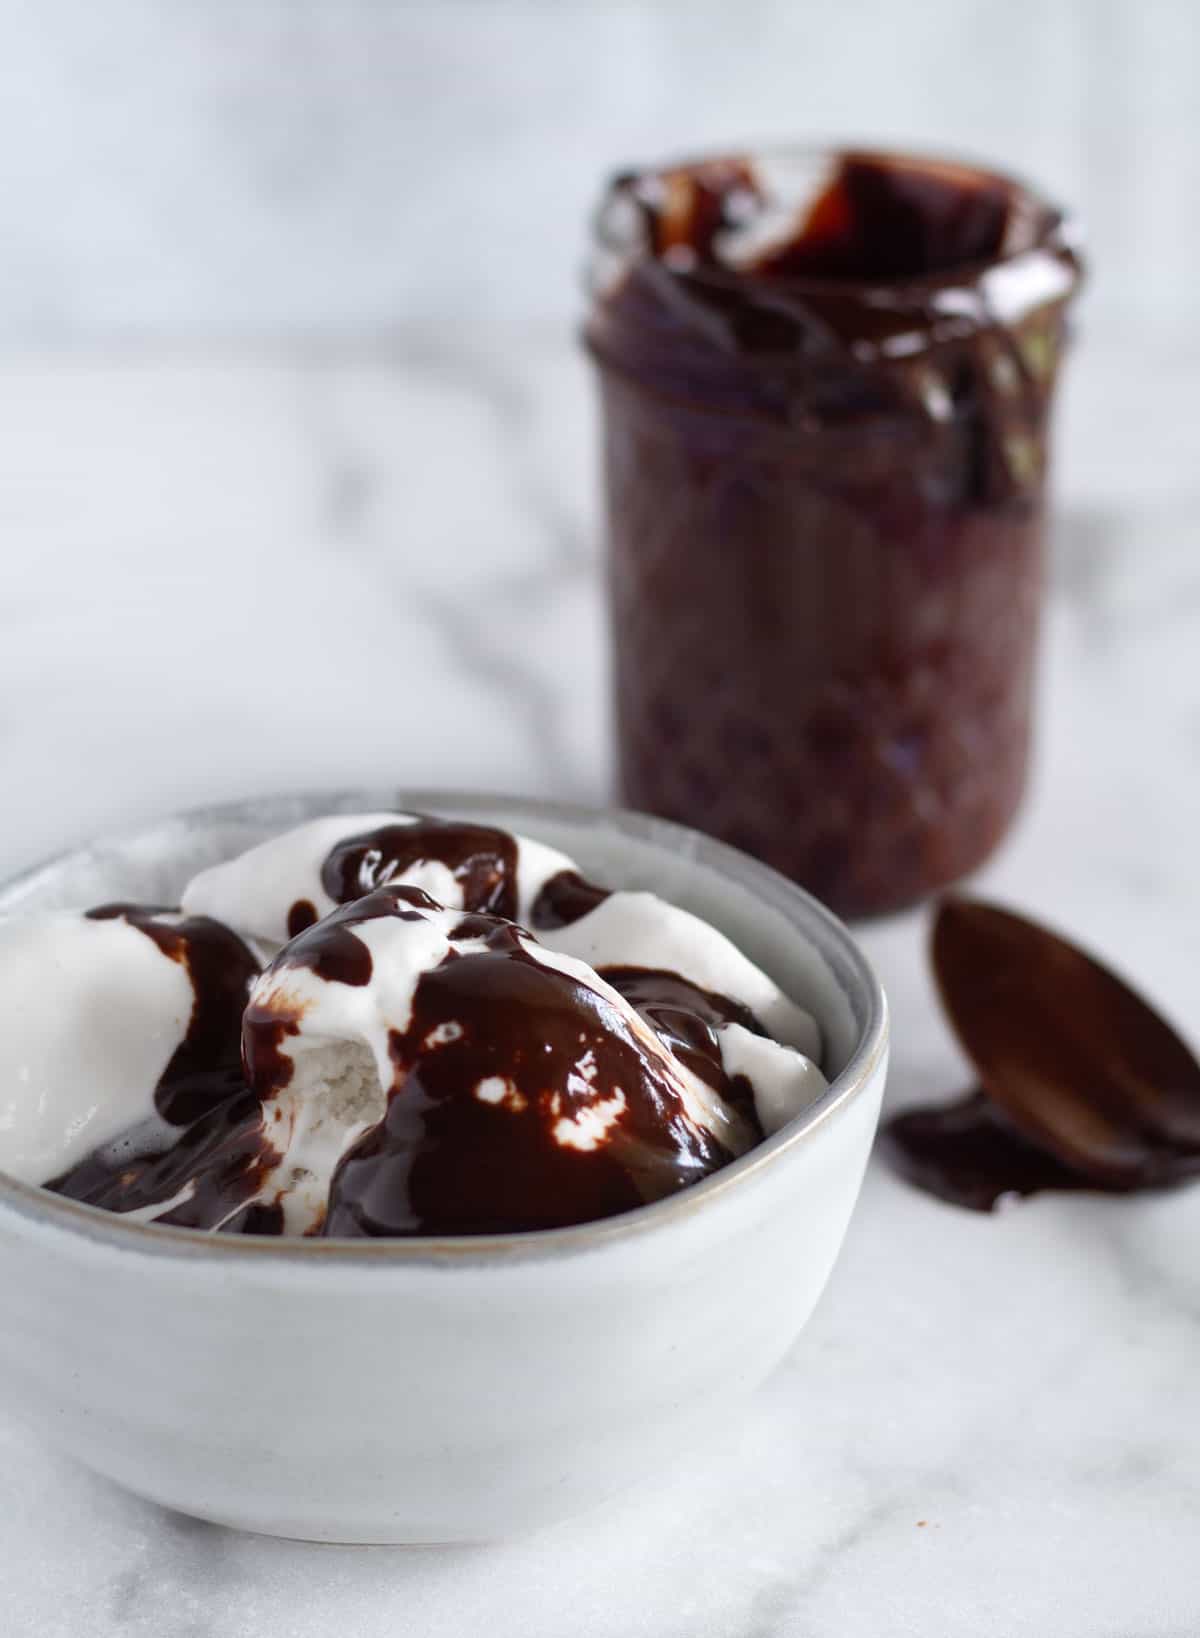 ice cream with chocolate syrup.